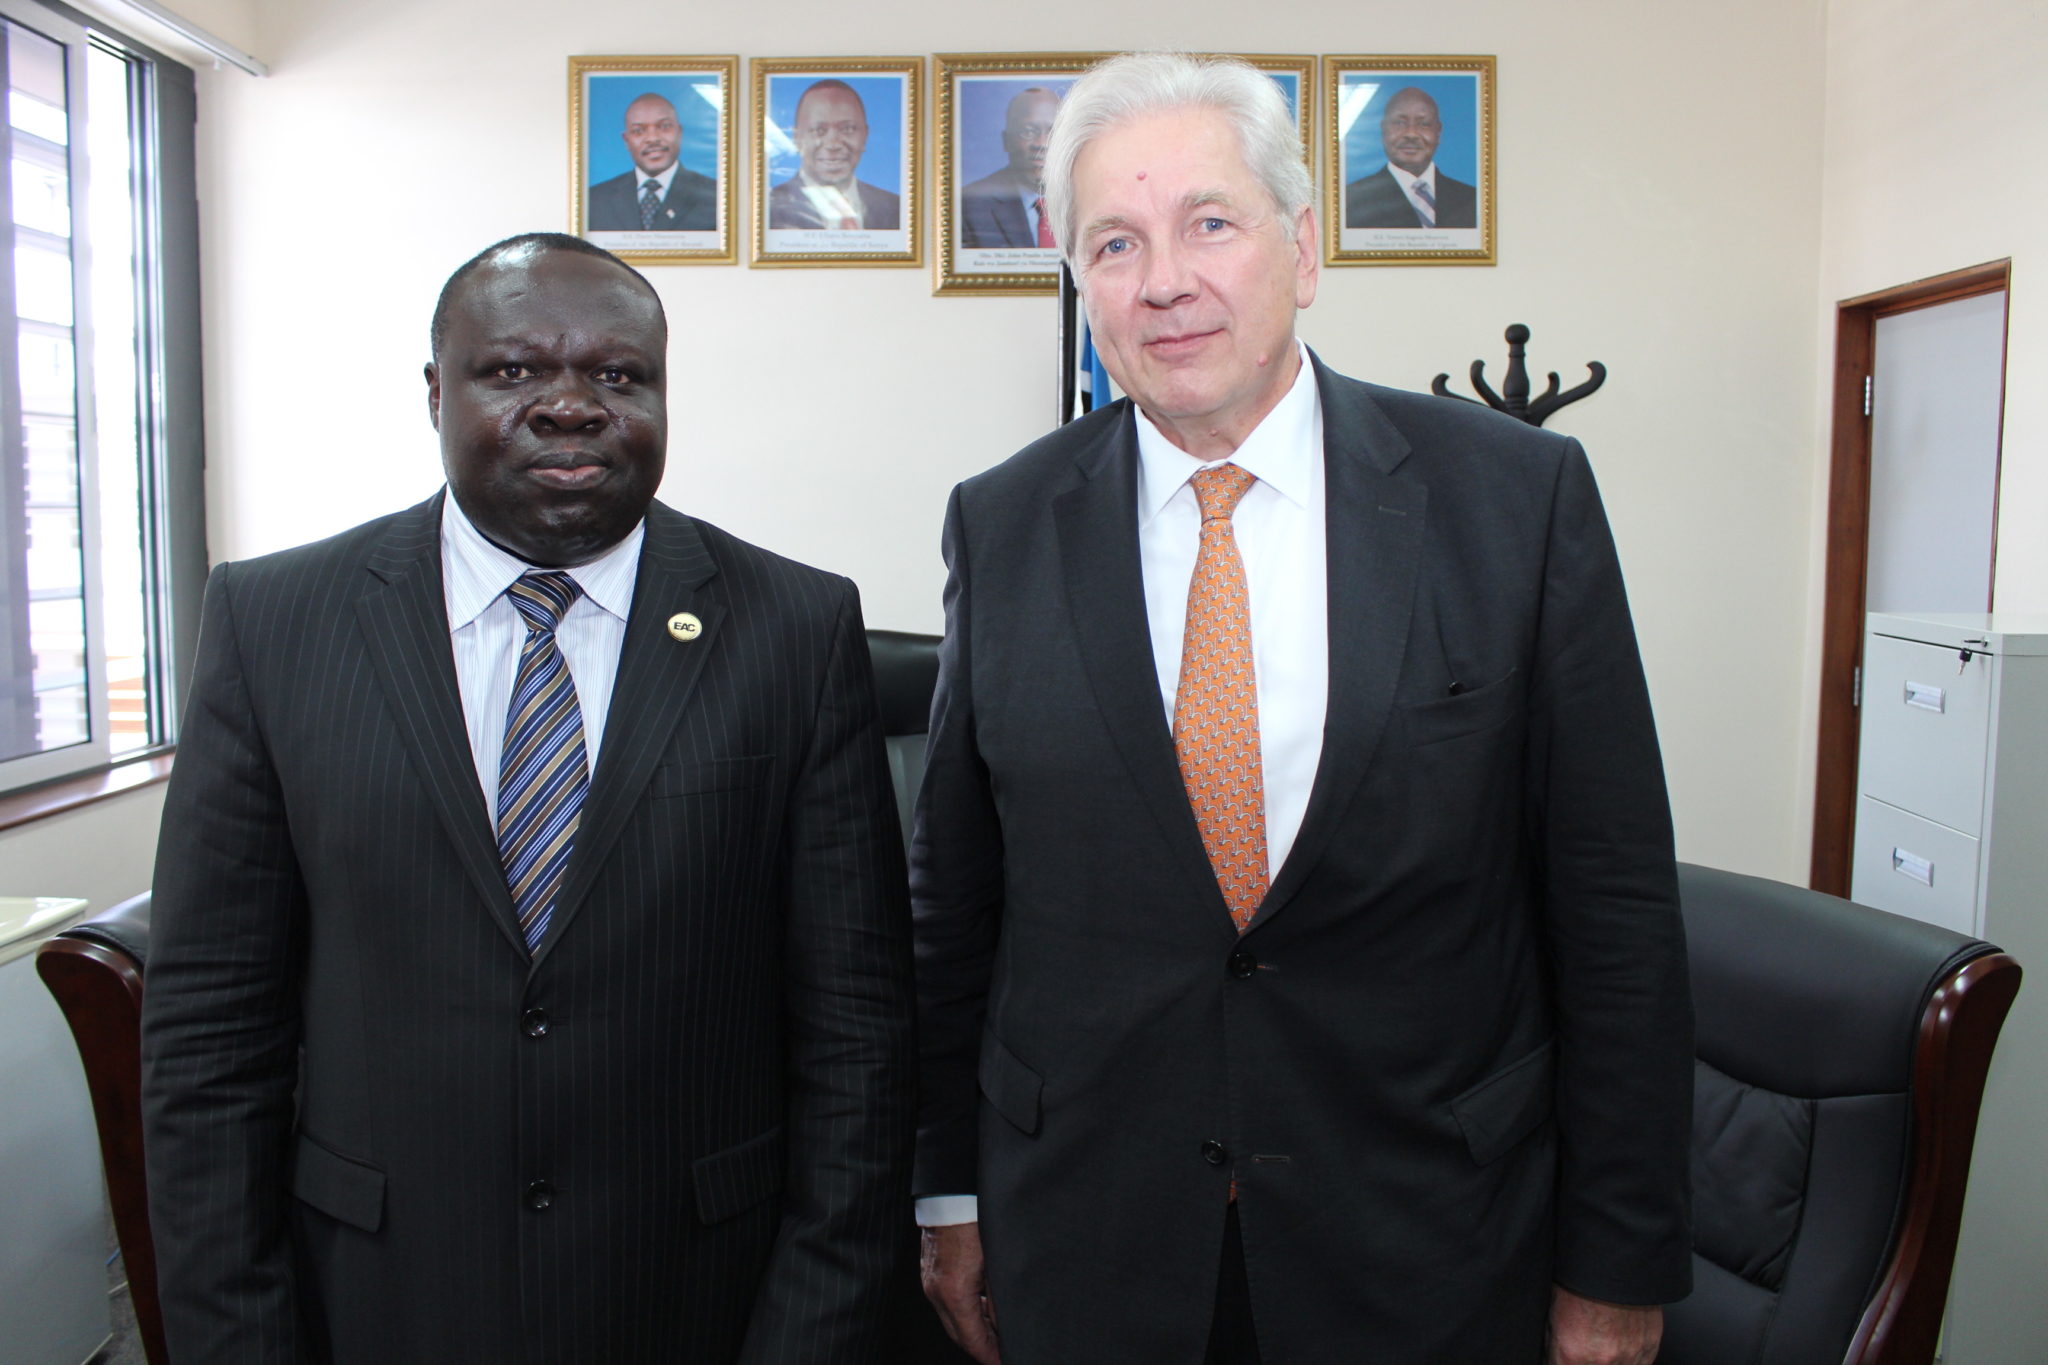 (L-R) EAC Deputy Secretary General in charge of Productive and Social Sectors; Mr. Christophe Bazivamo, and the German Ambassador to Tanzania and the EAC, H.E. Egon Kochanke at the EAC Headquarters.